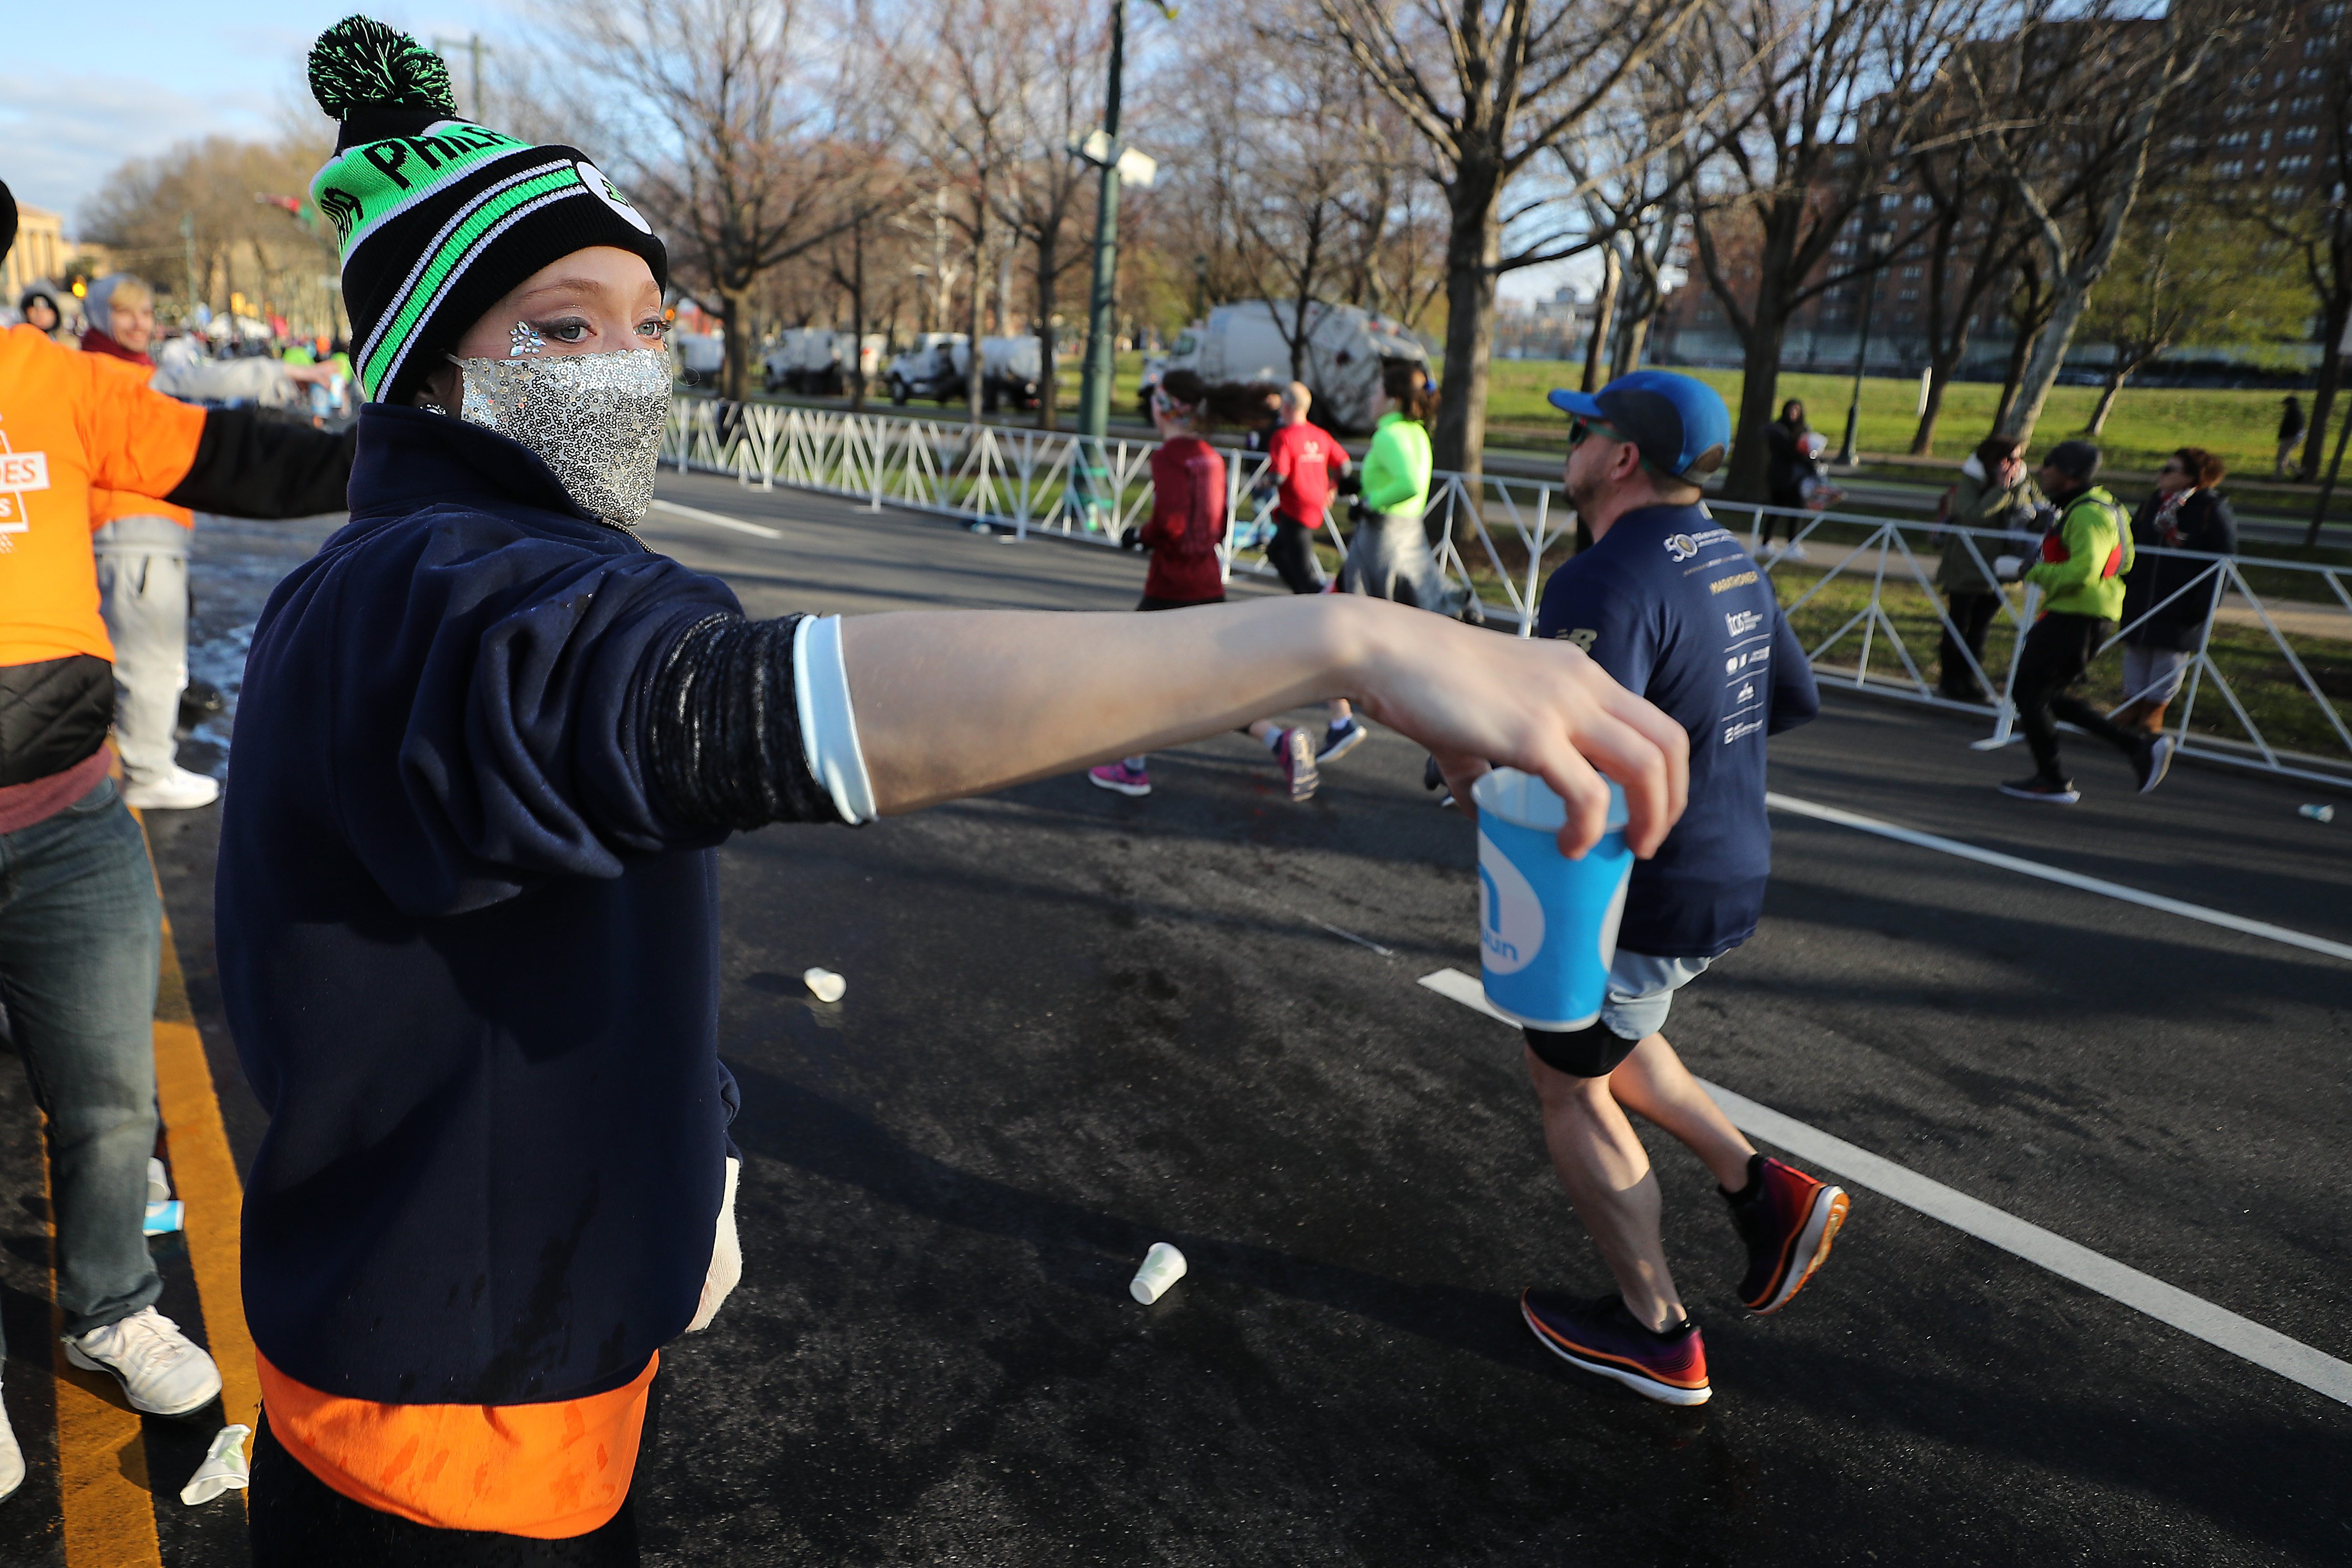 Photos from the Love Run Philadelphia on the Parkway.